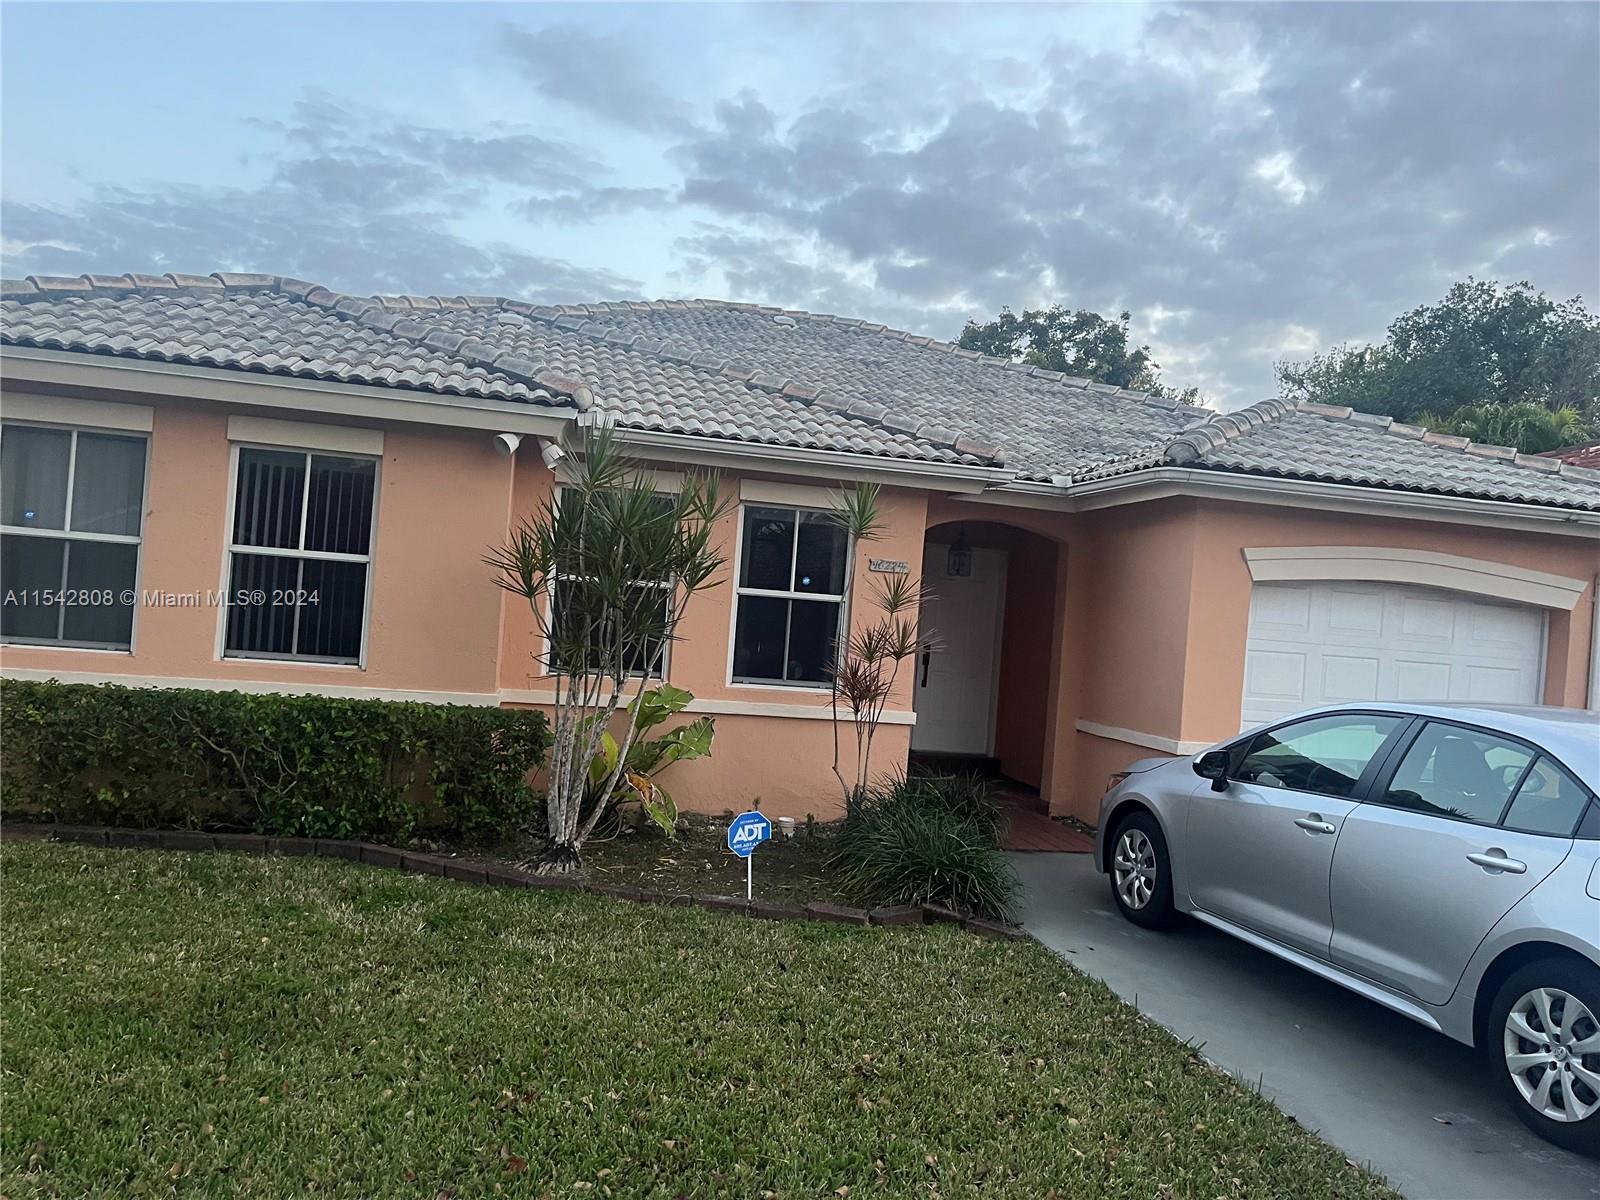 Located in one of the most desirable areas of West Kendall, this cozy home is a perfect starter home